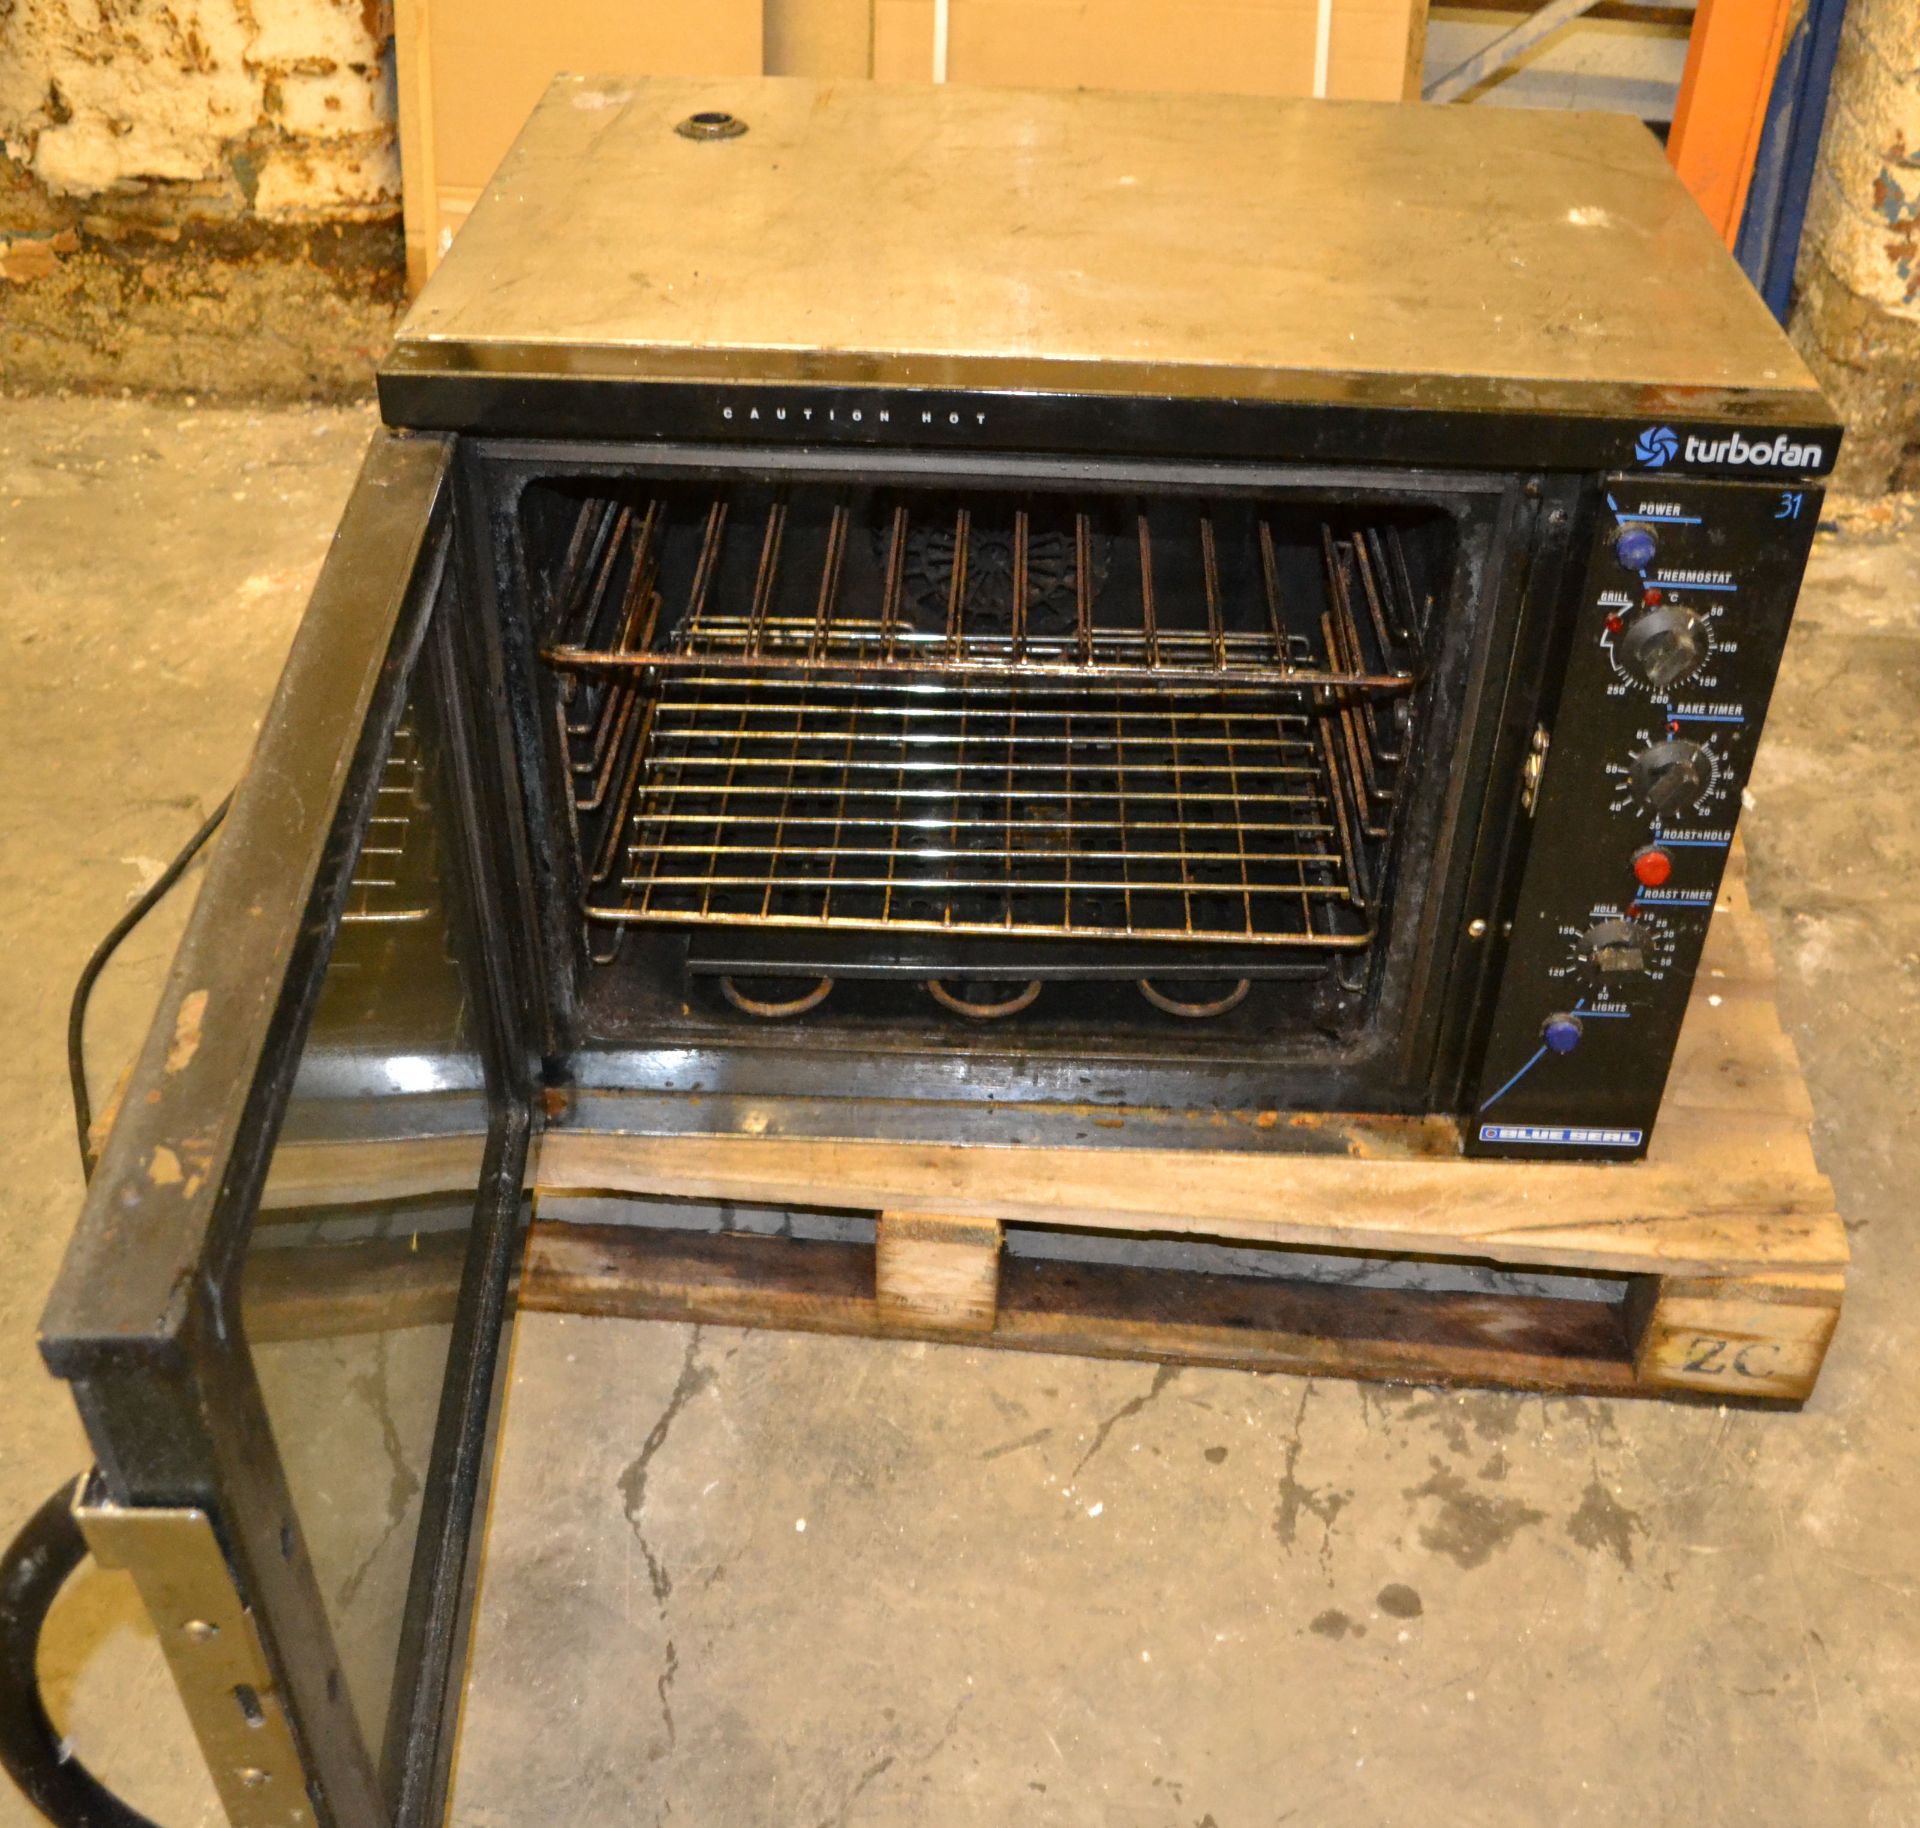 1 x Blue Seal E31 Turbofan Convection Oven - Ref: FJC012 - CL124 - Location: Bolton BL1 - Used - Image 4 of 7